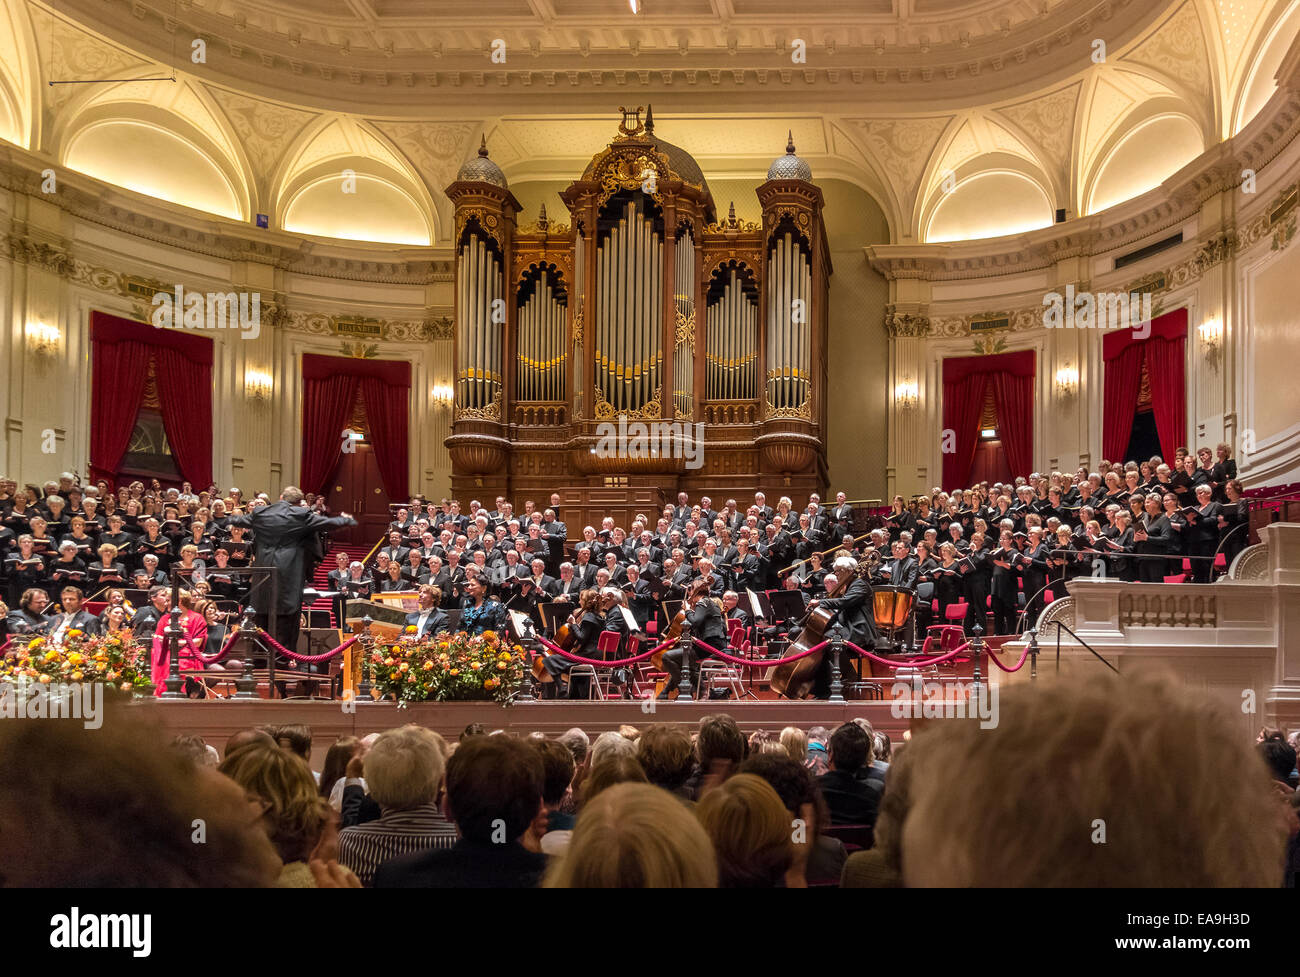 Amsterdam Royal Concertgebouw interior. Oratorio choir of 250 singing the Messiah. Sunday Matinee afternoon concert performance Stock Photo